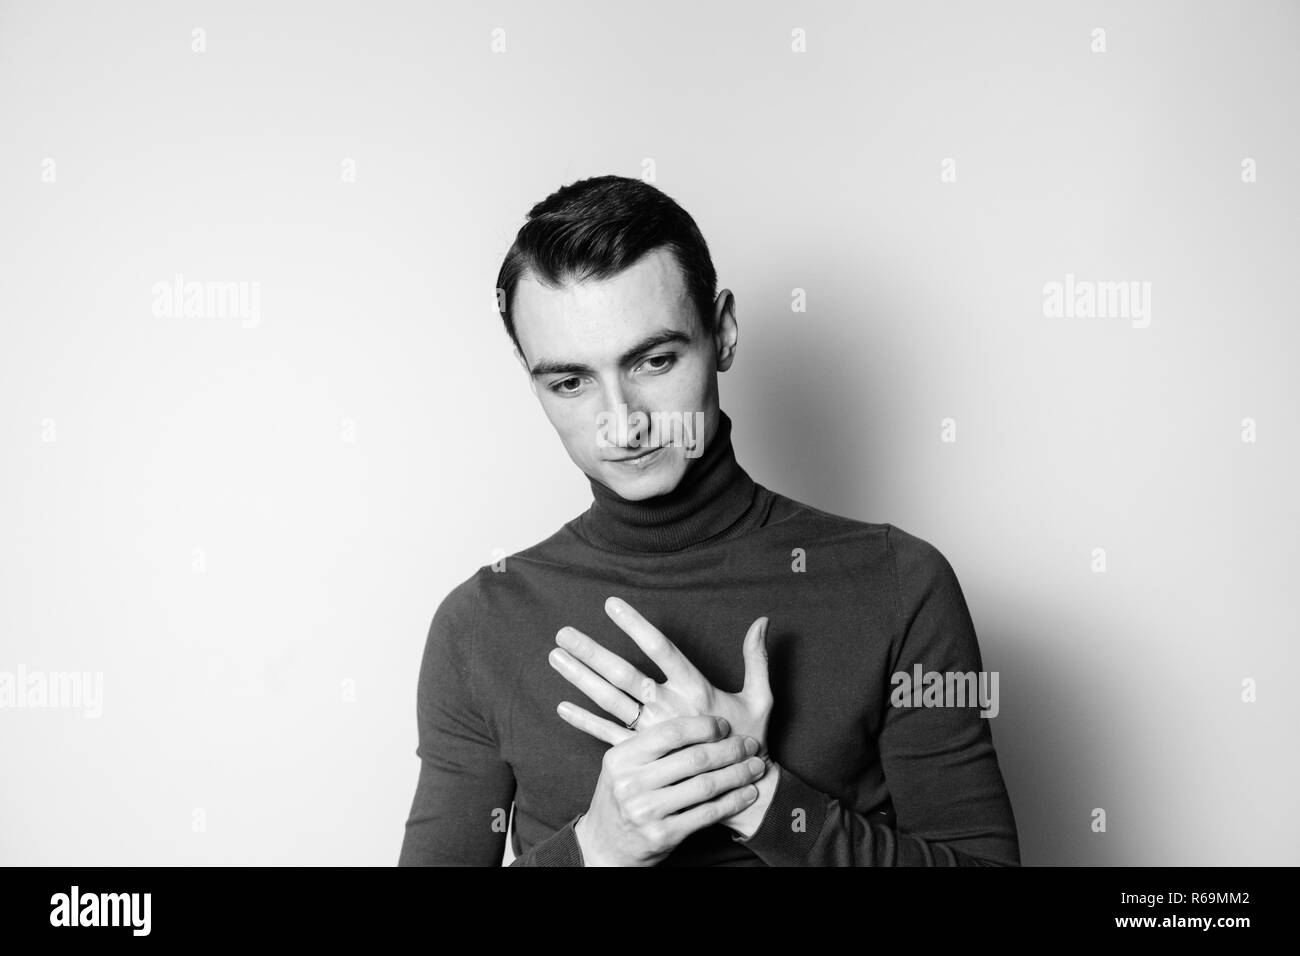 Close up black and white portrait of a young man wearing turtleneck jumper, looking to the side, against plain studio background Stock Photo